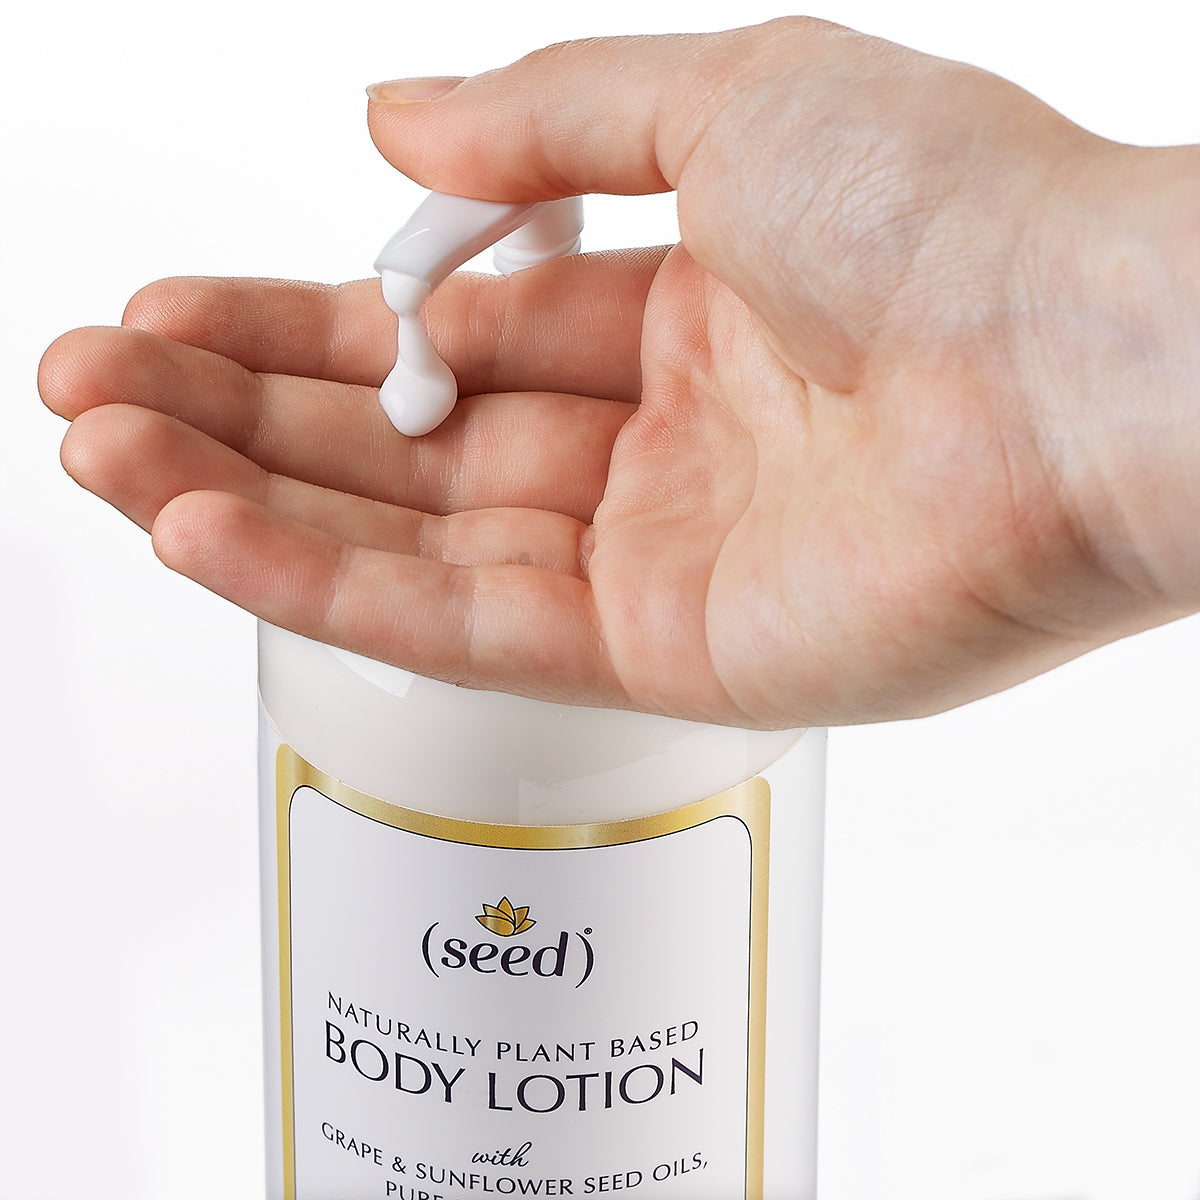 Seed Body Lotion in use - dispensing